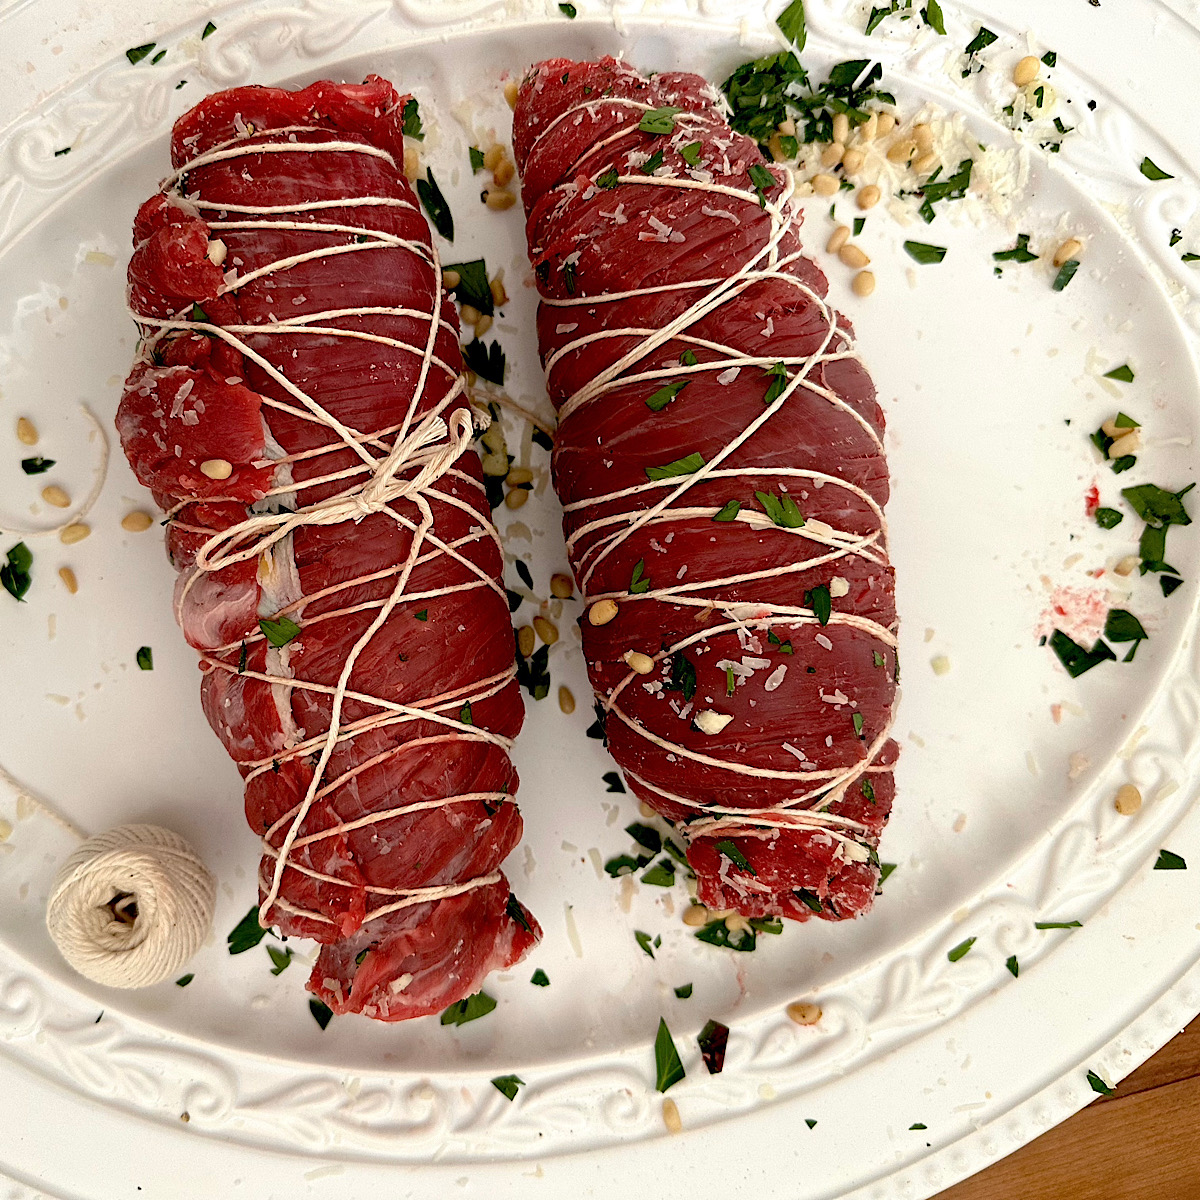 2 braciole rolls secured with twine on a white plate.